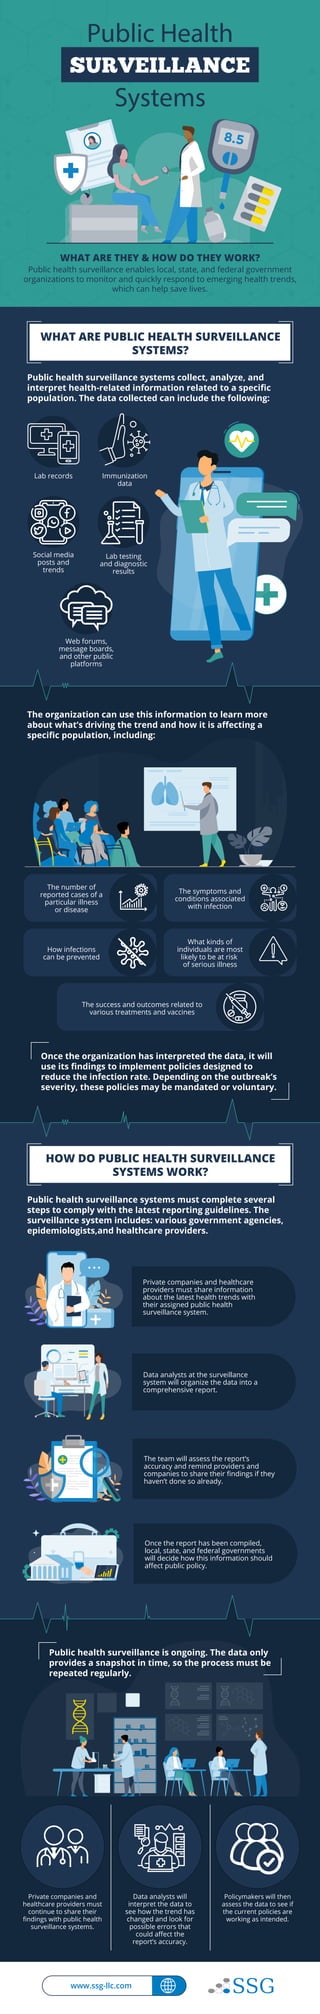 Public health surveillance systems collect, analyze, and
interpret health-related information related to a speciﬁc
population. The data collected can include the following:
WHAT ARE PUBLIC HEALTH SURVEILLANCE
SYSTEMS?
SURVEILLANCE
Systems
Public Health
Public health surveillance enables local, state, and federal government
organizations to monitor and quickly respond to emerging health trends,
which can help save lives.
WHAT ARE THEY & HOW DO THEY WORK?
Web forums,
message boards,
and other public
platforms
Social media
posts and
trends
Lab records
Lab testing
and diagnostic
results
Immunization
data
The organization can use this information to learn more
about what’s driving the trend and how it is aﬀecting a
speciﬁc population, including:
Once the organization has interpreted the data, it will
use its ﬁndings to implement policies designed to
reduce the infection rate. Depending on the outbreak’s
severity, these policies may be mandated or voluntary.
The number of
reported cases of a
particular illness
or disease
The symptoms and
conditions associated
with infection
What kinds of
individuals are most
likely to be at risk
of serious illness
How infections
can be prevented
The success and outcomes related to
various treatments and vaccines
Public health surveillance is ongoing. The data only
provides a snapshot in time, so the process must be
repeated regularly.
HOW DO PUBLIC HEALTH SURVEILLANCE
SYSTEMS WORK?
Public health surveillance systems must complete several
steps to comply with the latest reporting guidelines. The
surveillance system includes: various government agencies,
epidemiologists,and healthcare providers.
Private companies and healthcare
providers must share information
about the latest health trends with
their assigned public health
surveillance system.
Once the report has been compiled,
local, state, and federal governments
will decide how this information should
aﬀect public policy.
The team will assess the report’s
accuracy and remind providers and
companies to share their ﬁndings if they
haven’t done so already.
Data analysts at the surveillance
system will organize the data into a
comprehensive report.
Private companies and
healthcare providers must
continue to share their
ﬁndings with public health
surveillance systems.
Data analysts will
interpret the data to
see how the trend has
changed and look for
possible errors that
could aﬀect the
report’s accuracy.
Policymakers will then
assess the data to see if
the current policies are
working as intended.
www.ssg-llc.com
 